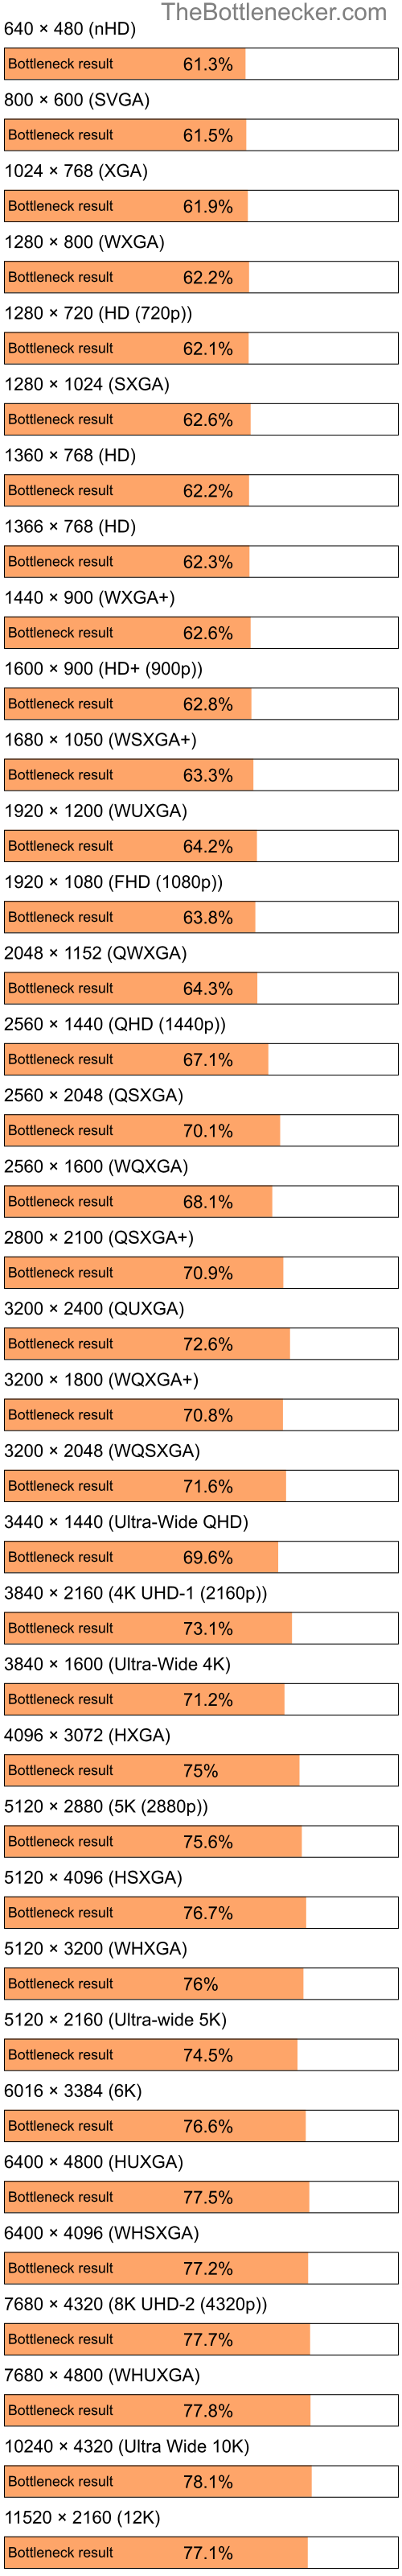 Bottleneck results by resolution for Intel Pentium 4 and NVIDIA Quadro FX 370 in General Tasks